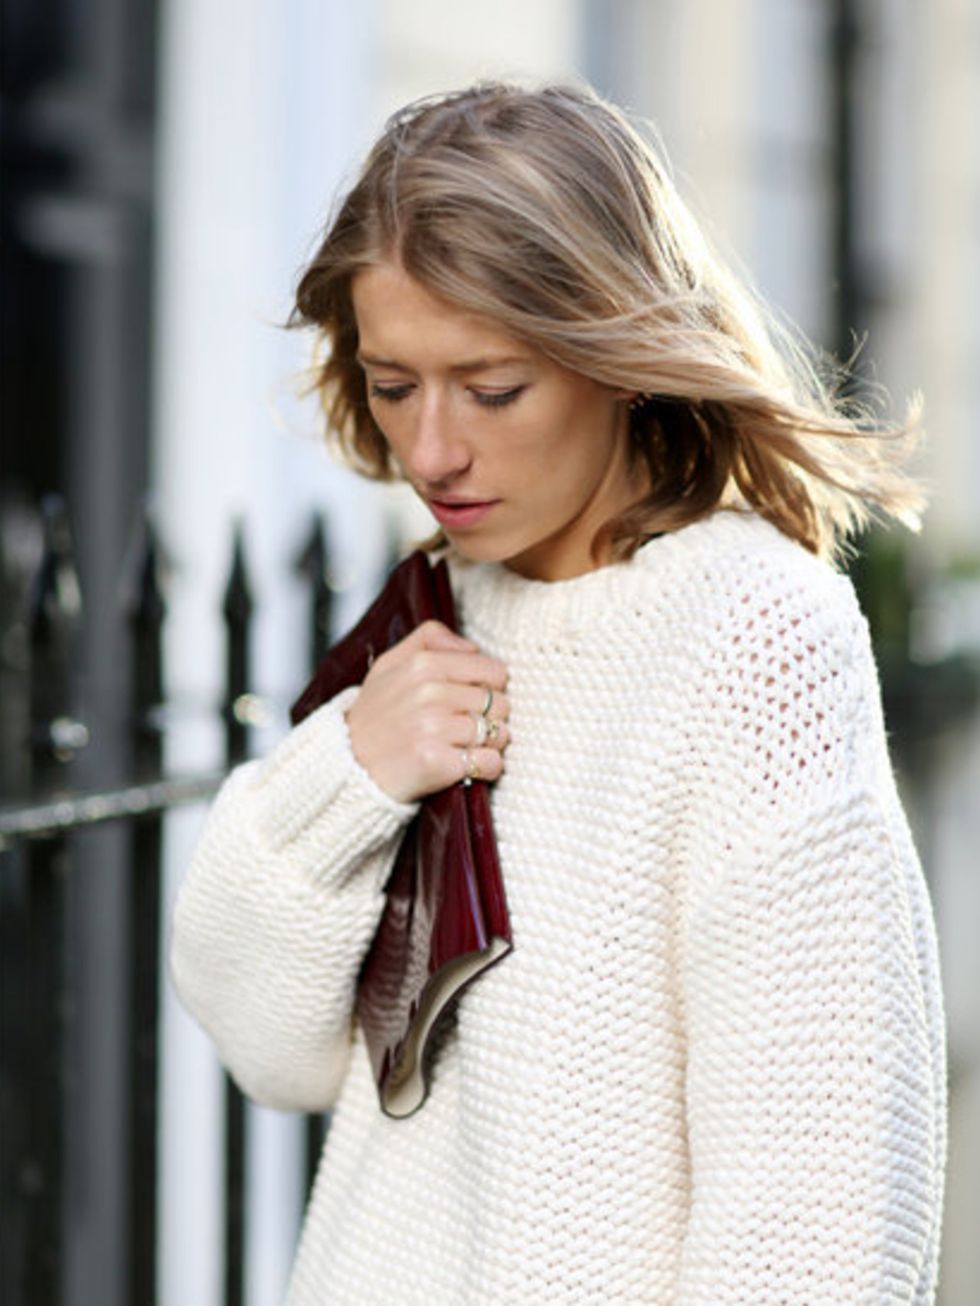 <p>Harriet wears <a href="http://www.stories.com/Ready-to-wear/Knitwear/Cotton_and_wool-blend_sweater/582940-596311.1">&amp; Other Stories</a> jumper, £65 and <a href="http://www.cosstores.com/gb/Shop/Women/Accessories/Bags_Purses">Cos bag</a> £79</p>